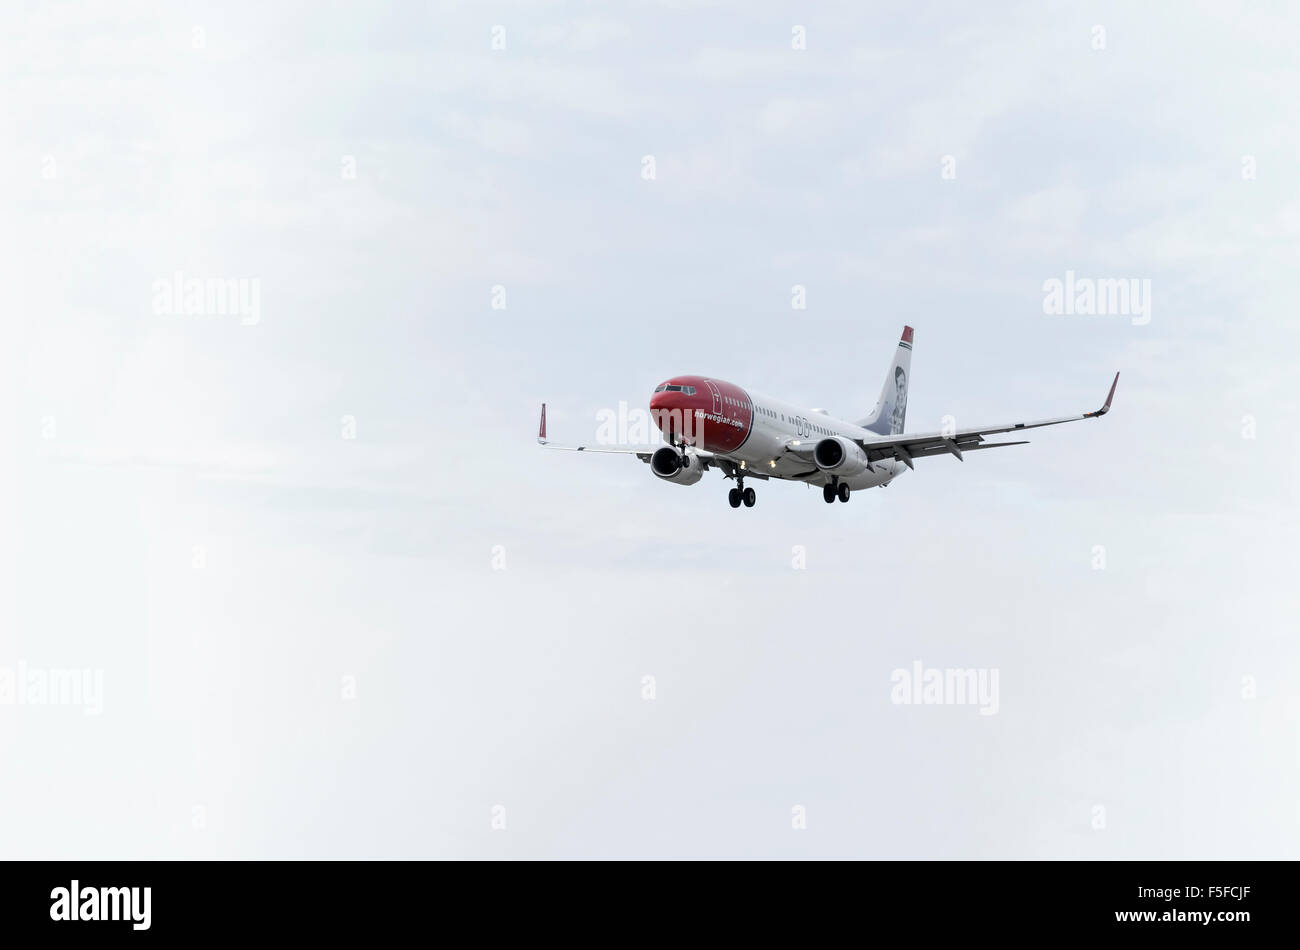 Aircraft -Boeing 737-8JP-, of -Norwegian (Helge Ingstad livery)- airline Stock Photo